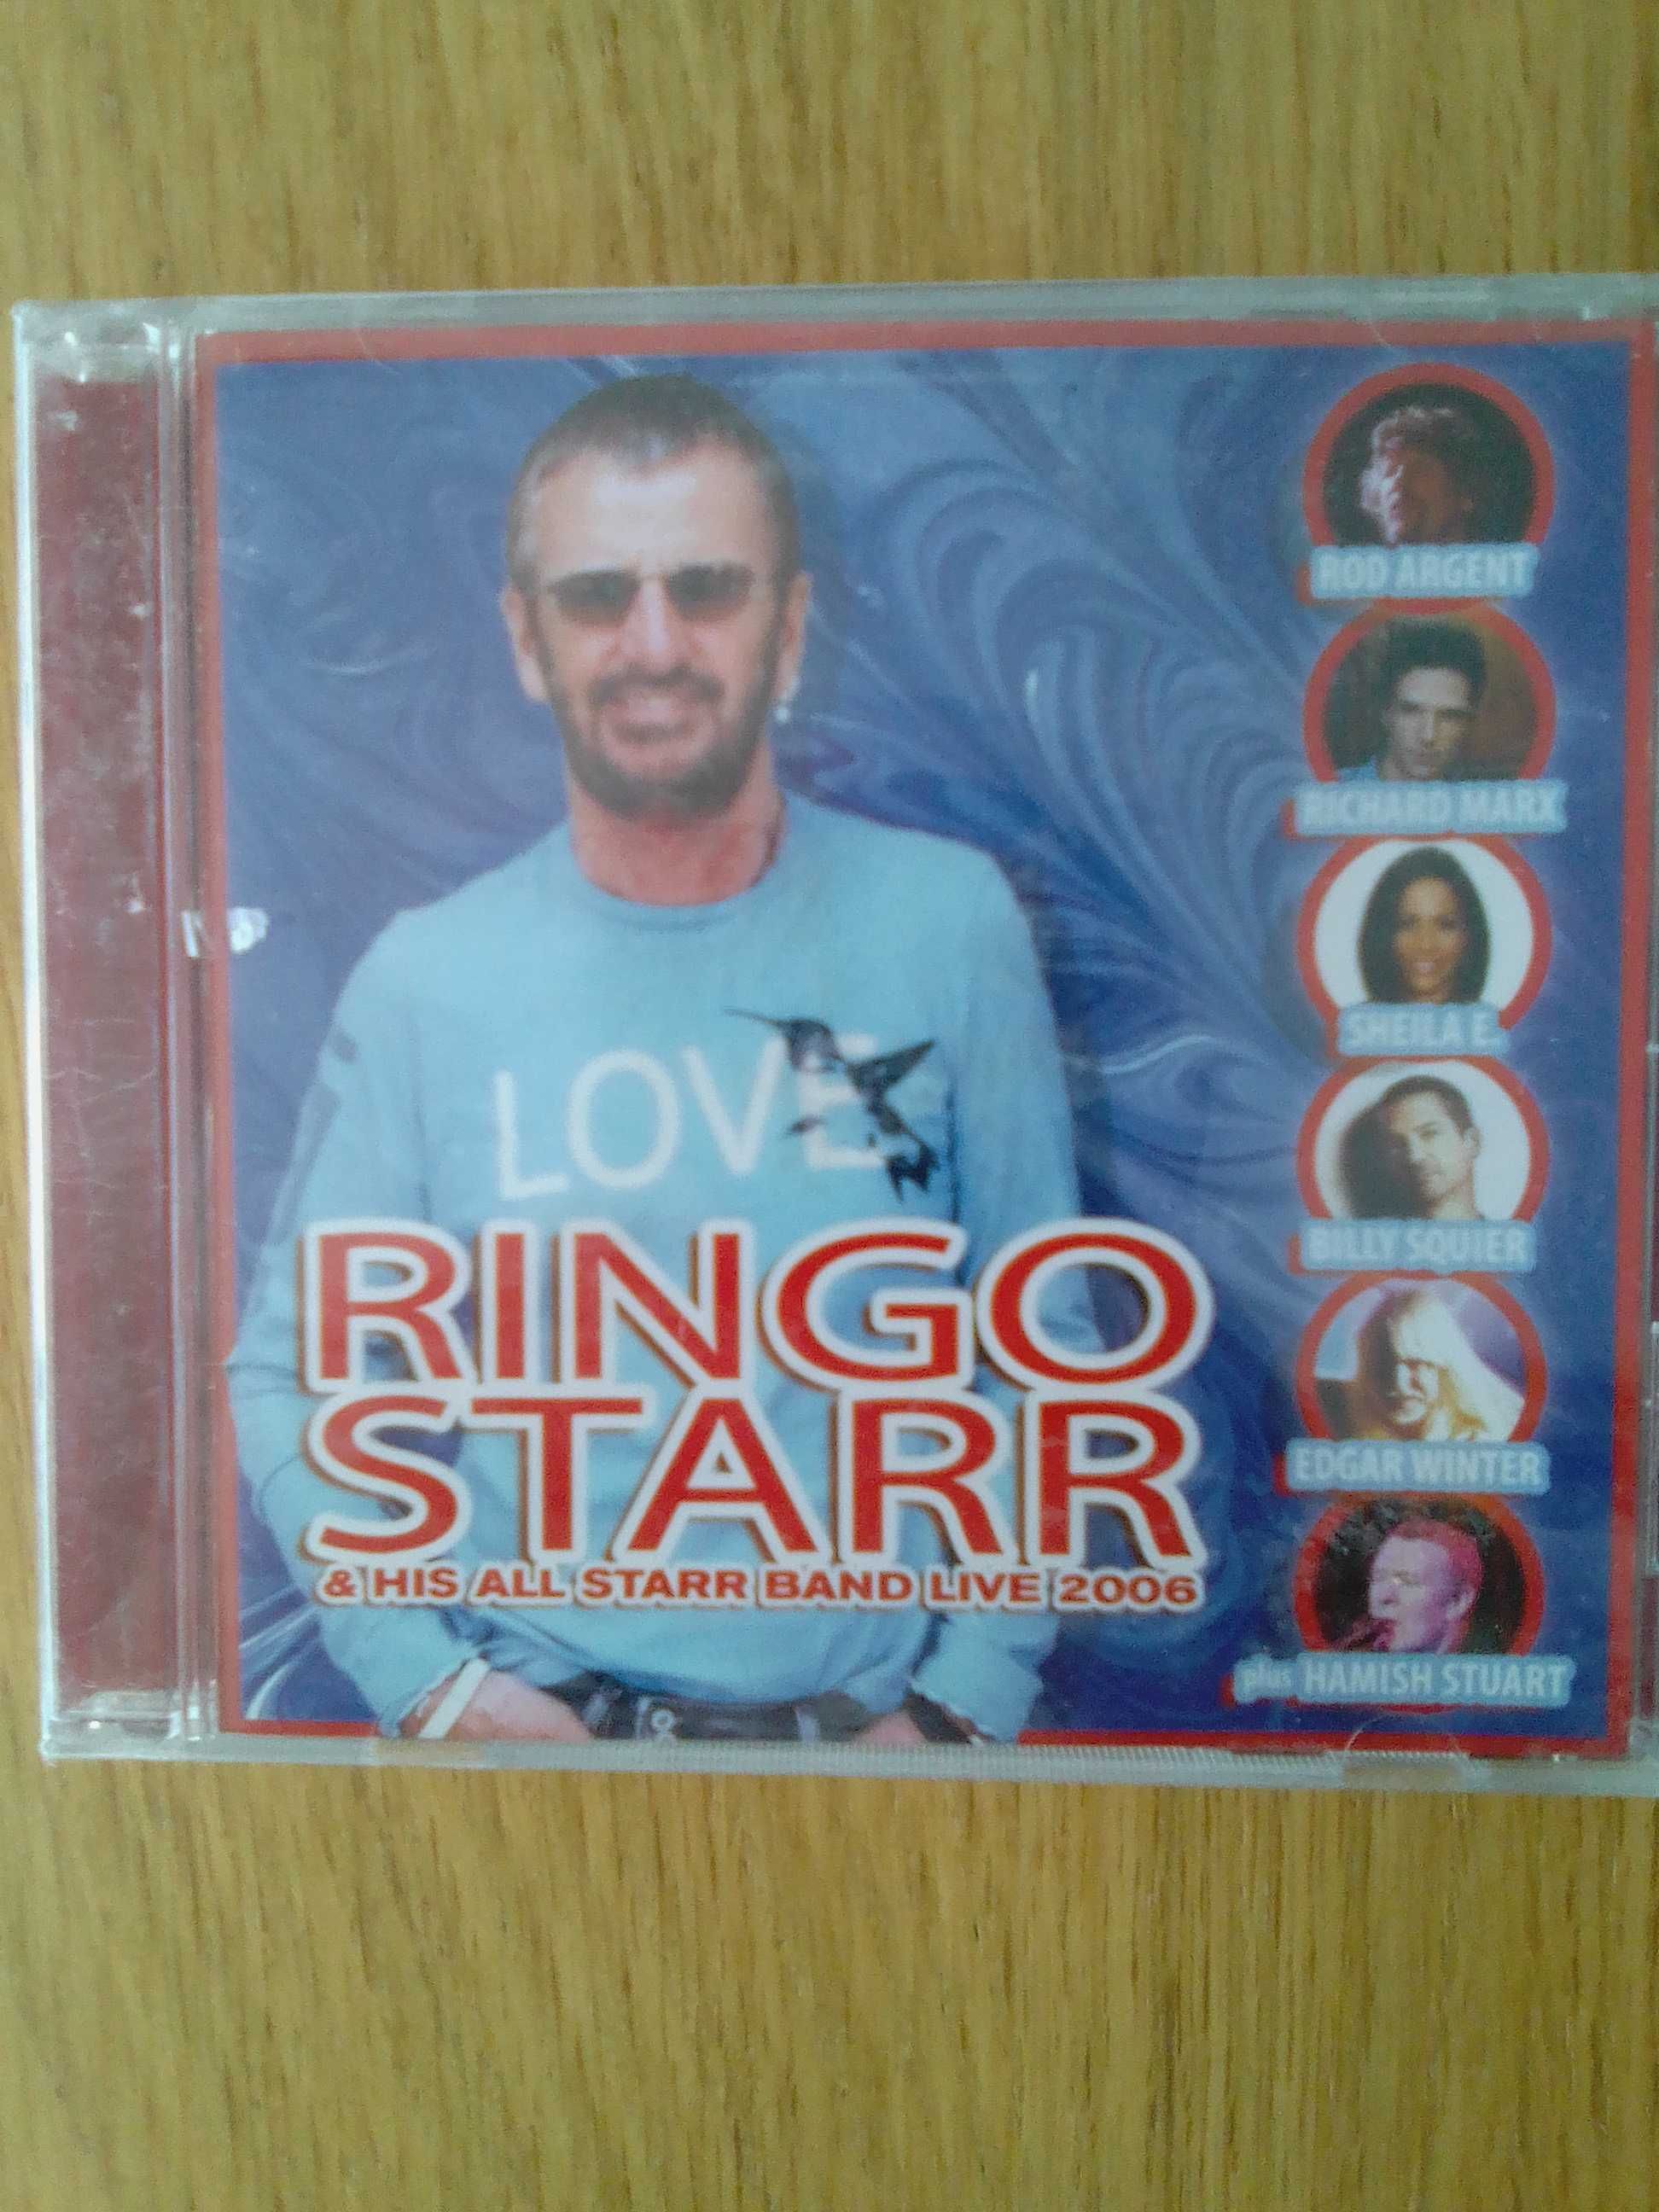 Ringo Starr & His All Starr Band Live 2006 CD